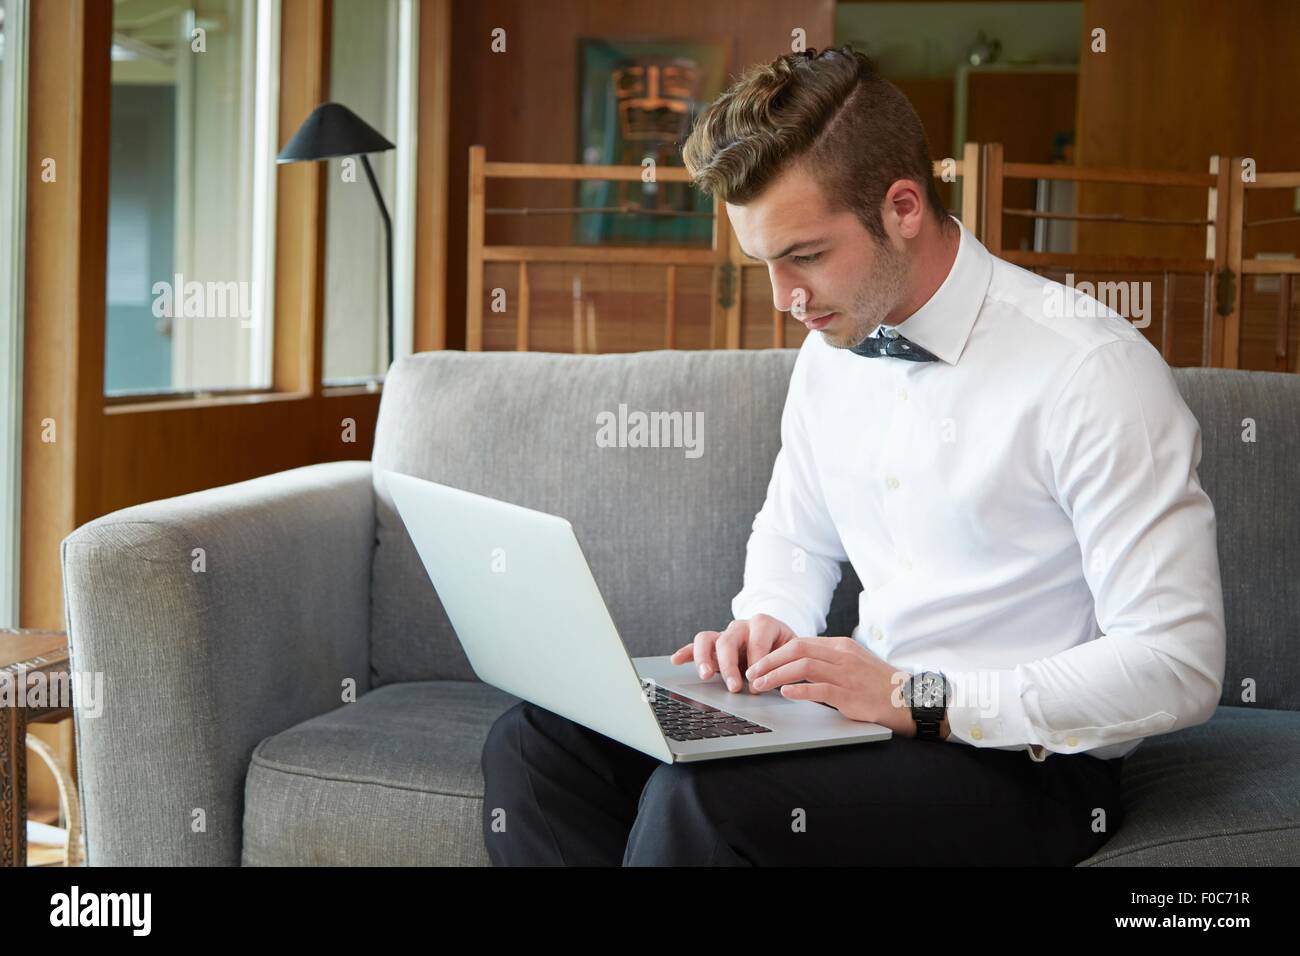 Portrait of man sitting on sofa working from laptop Stock Photo